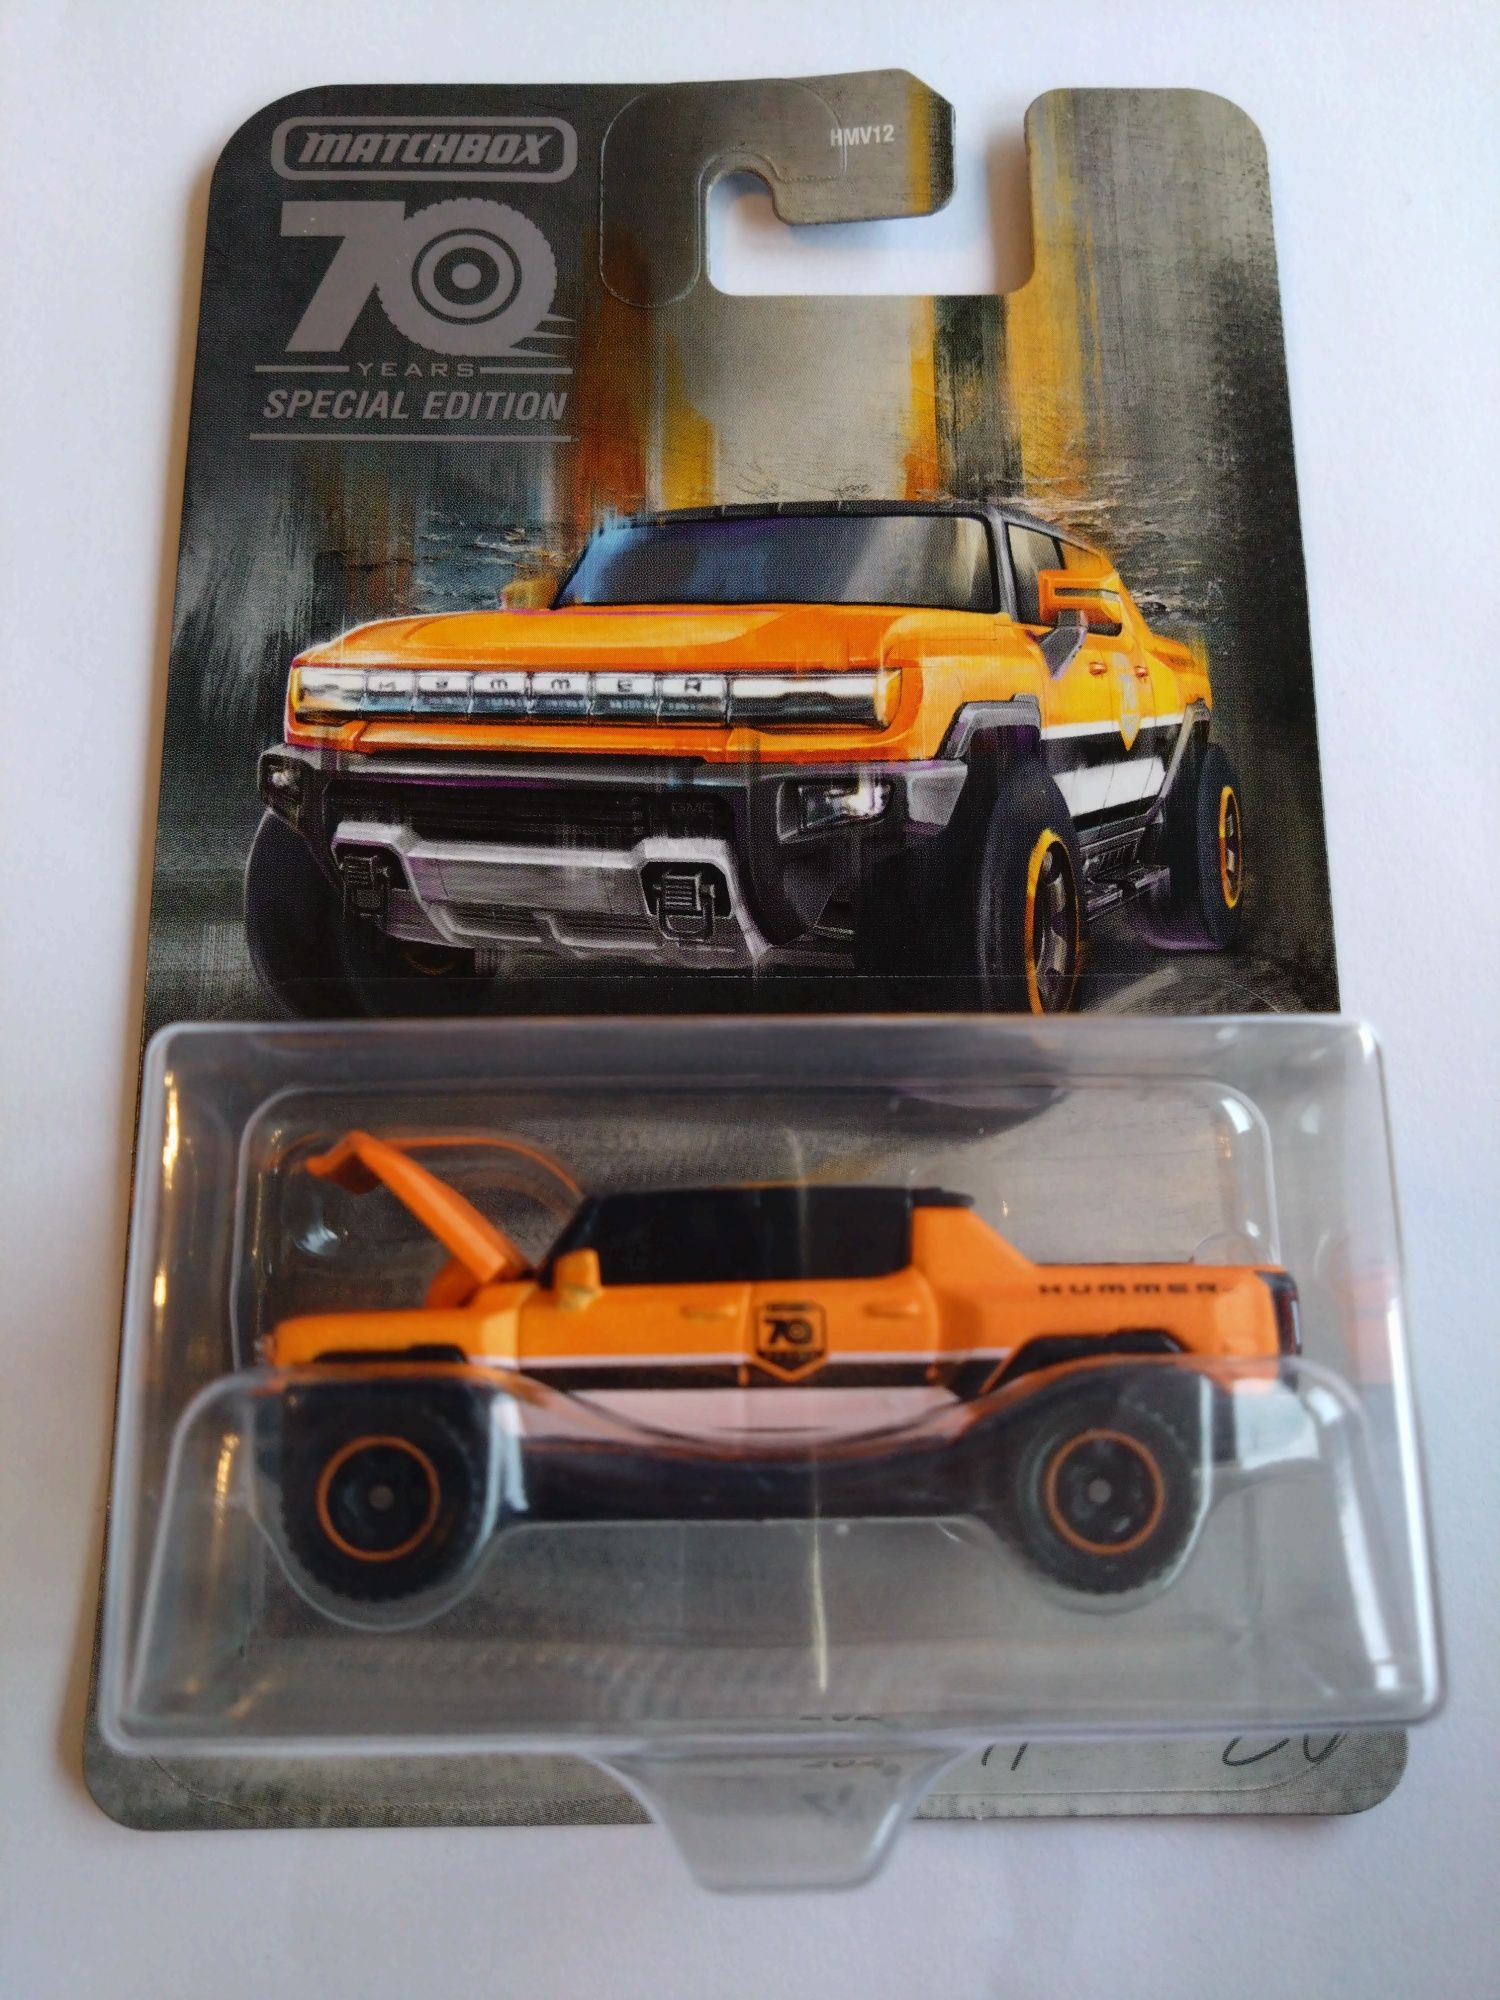 Matchbox Hummer EV - 70 Years Special Edition